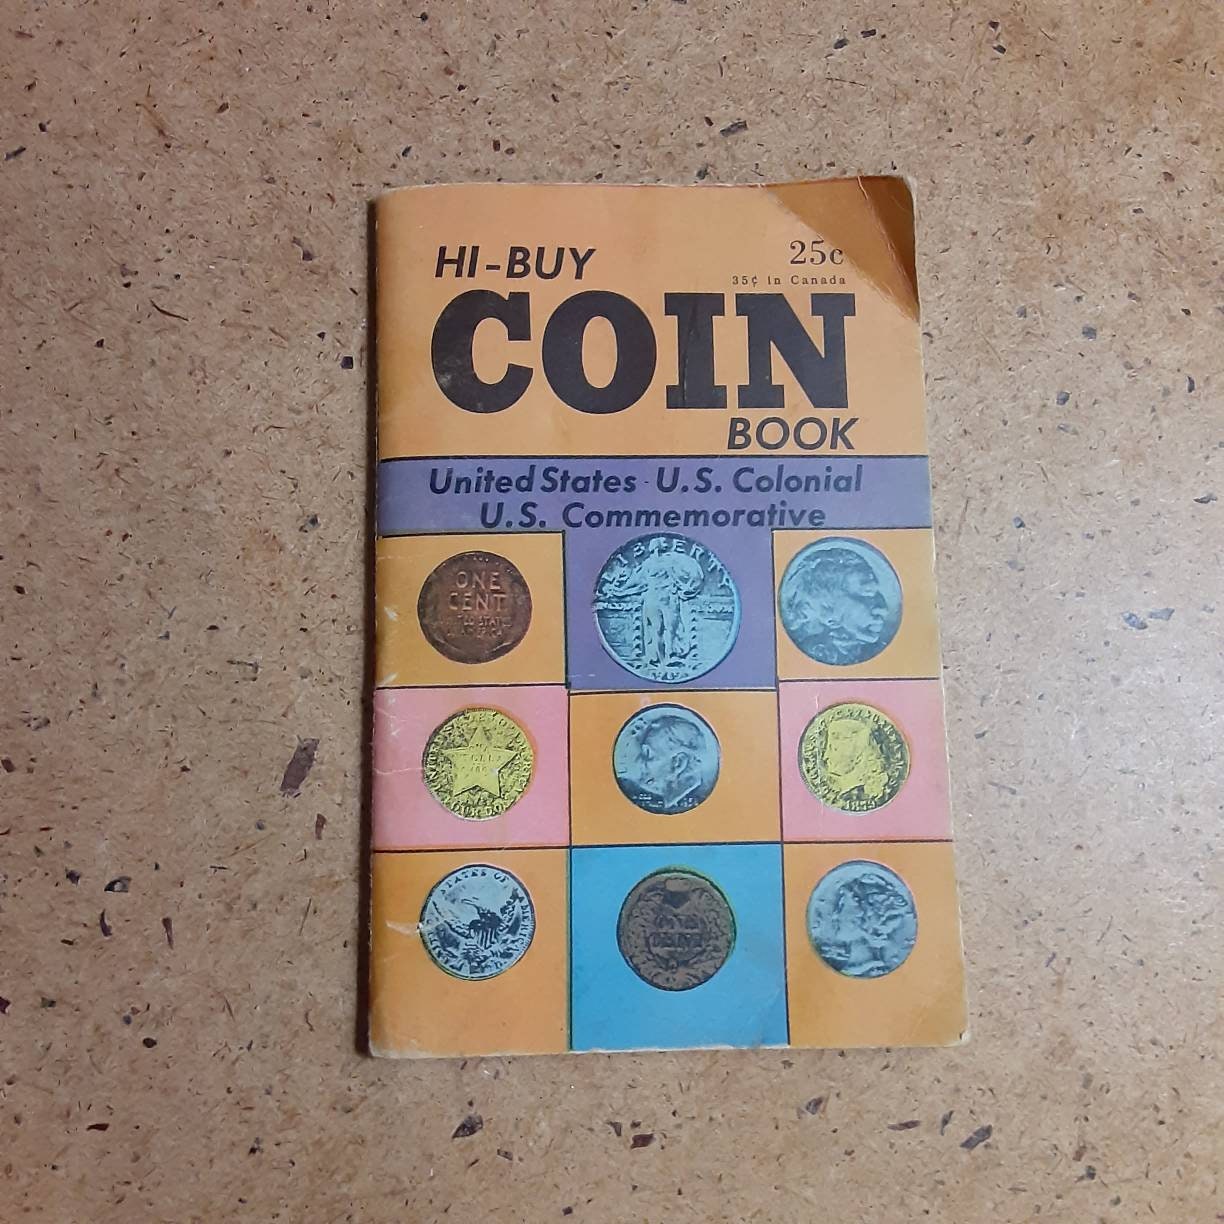 Vintage Hi-buy Coin Book Guide for Coin Selling Collecting Sorting, Pricing  Guide Manual Handbook, 1964 1965 US Commemorative Coins -  Israel